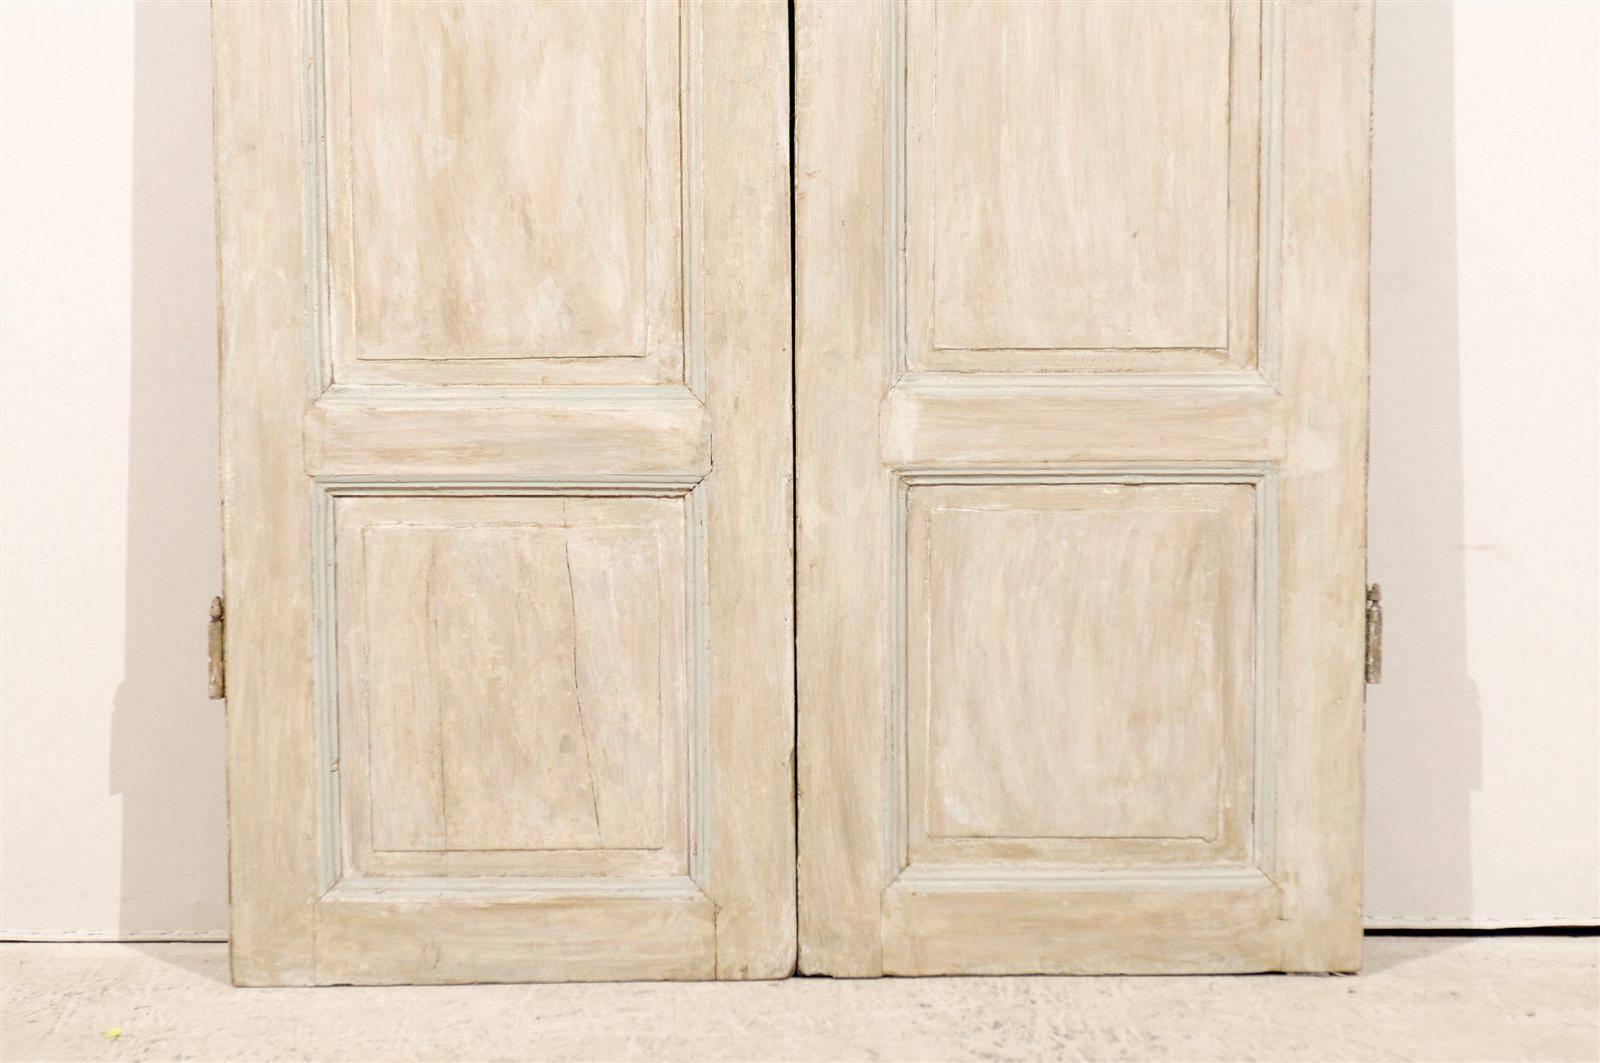 Pair of Tall French Doors from the Mid-19th Century 2